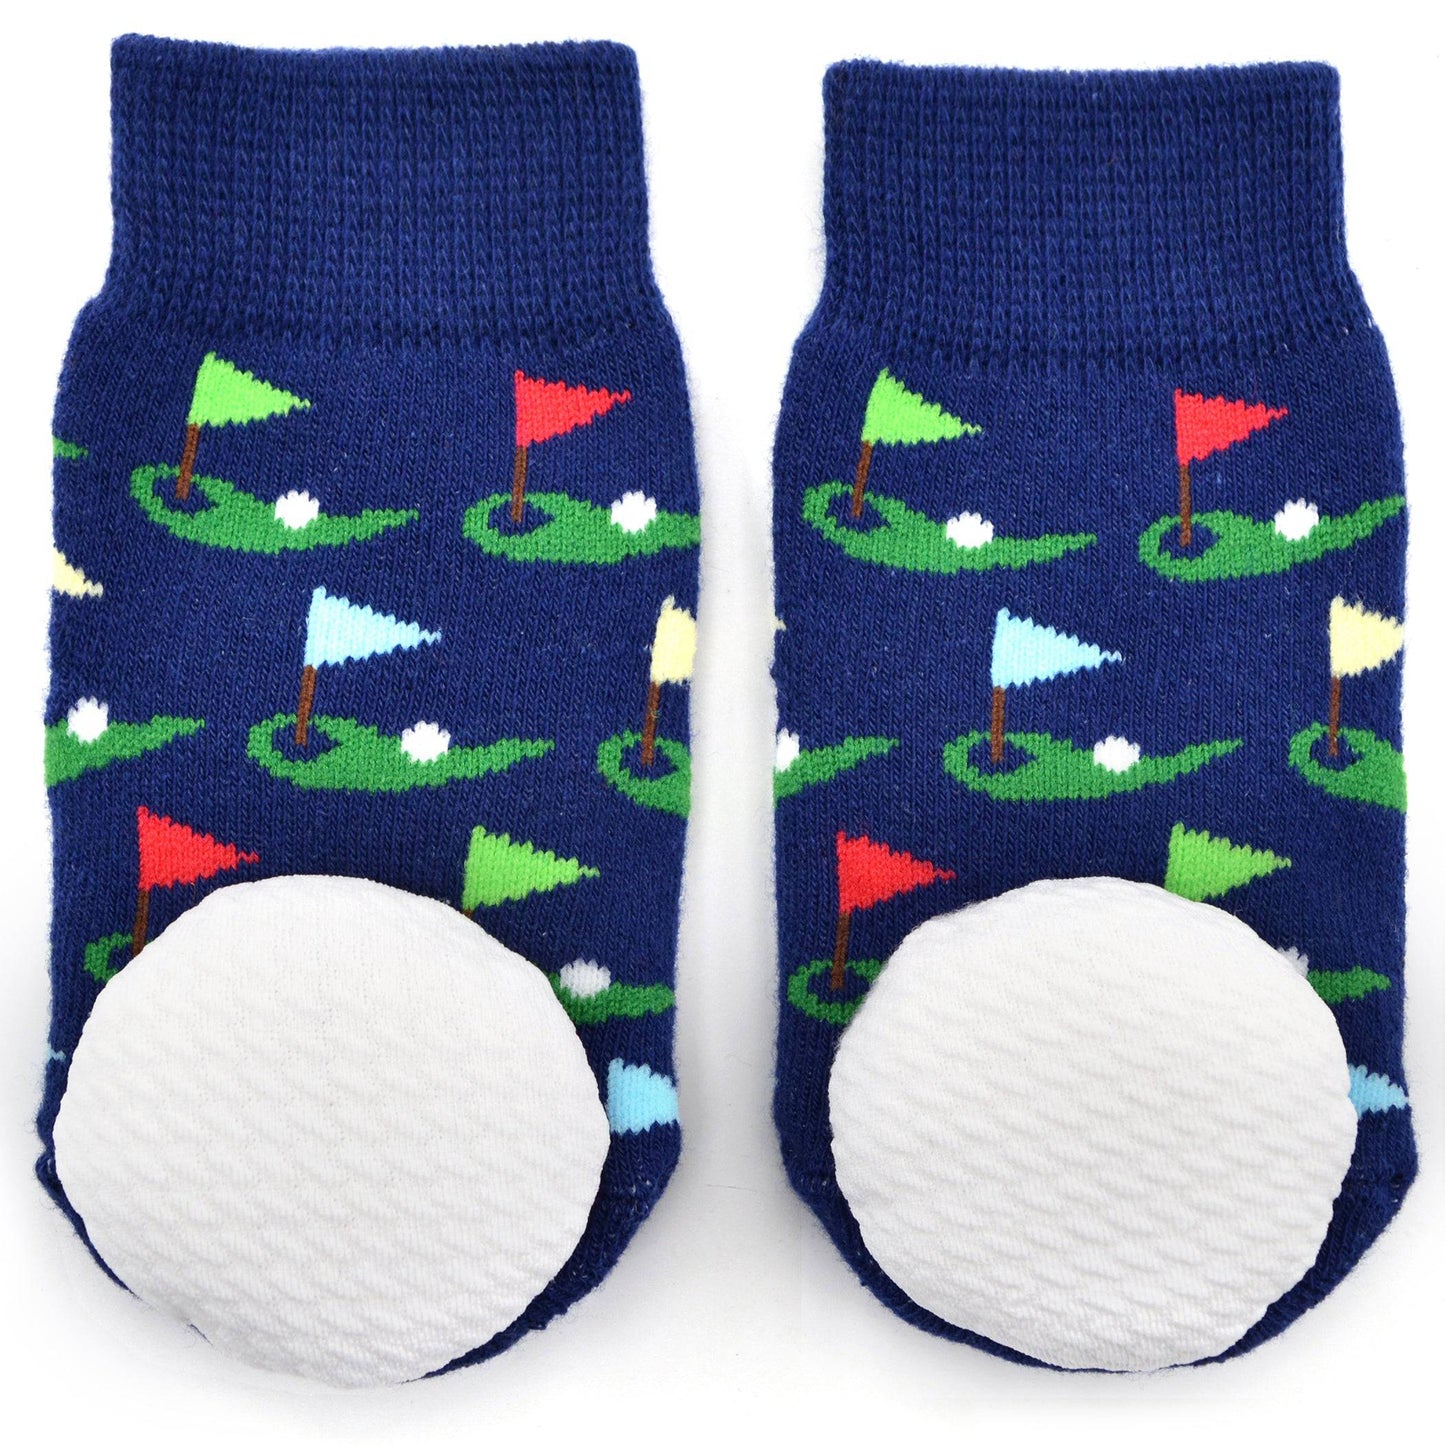 Boogie Toes -Golf Rattle Socks